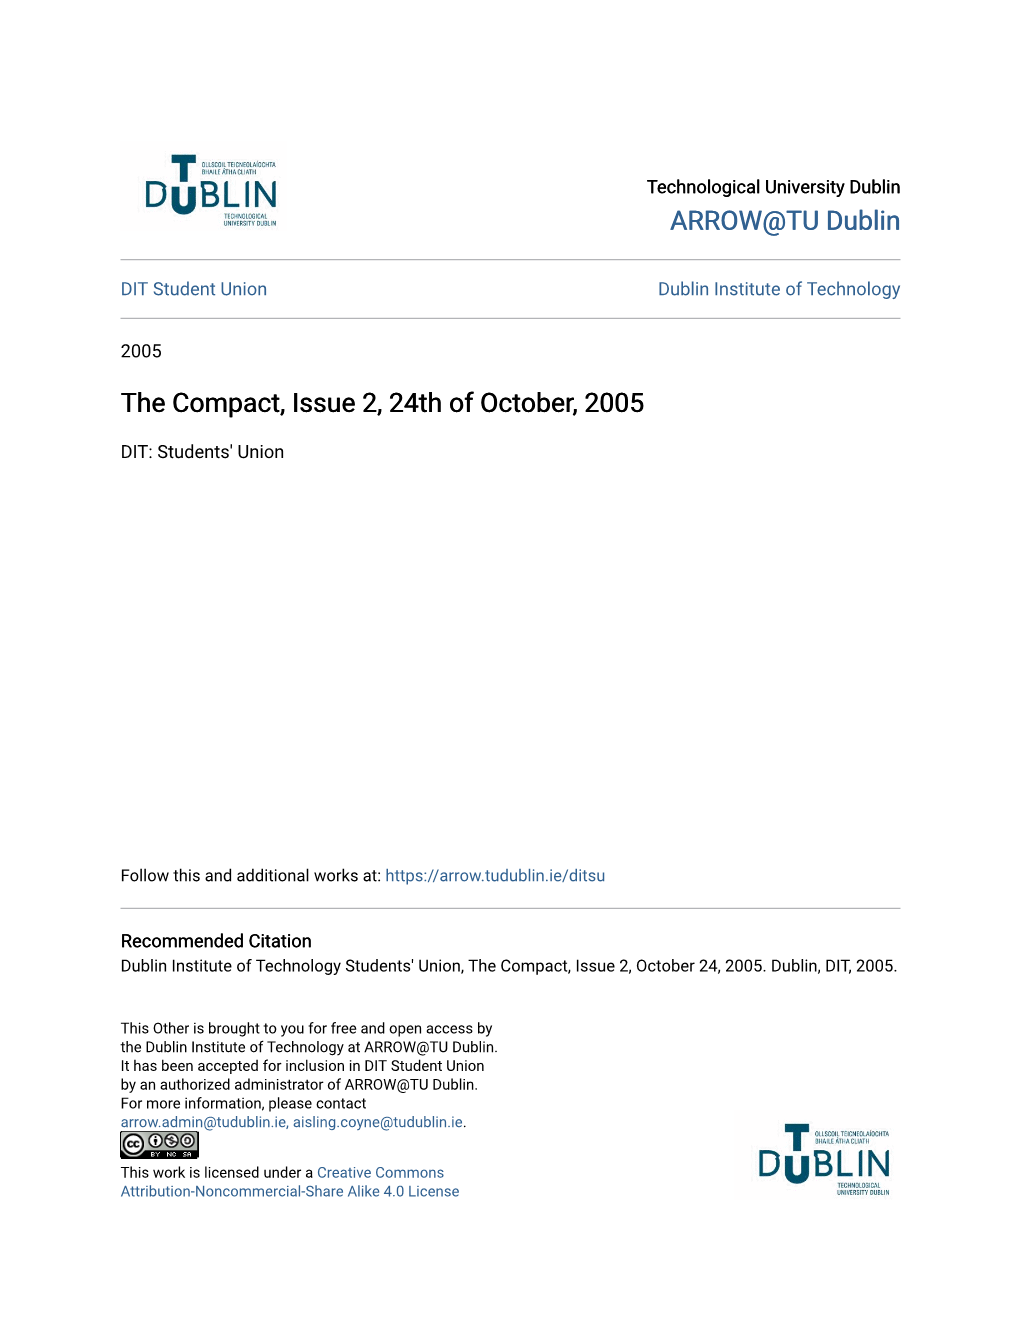 The Compact, Issue 2, 24Th of October, 2005